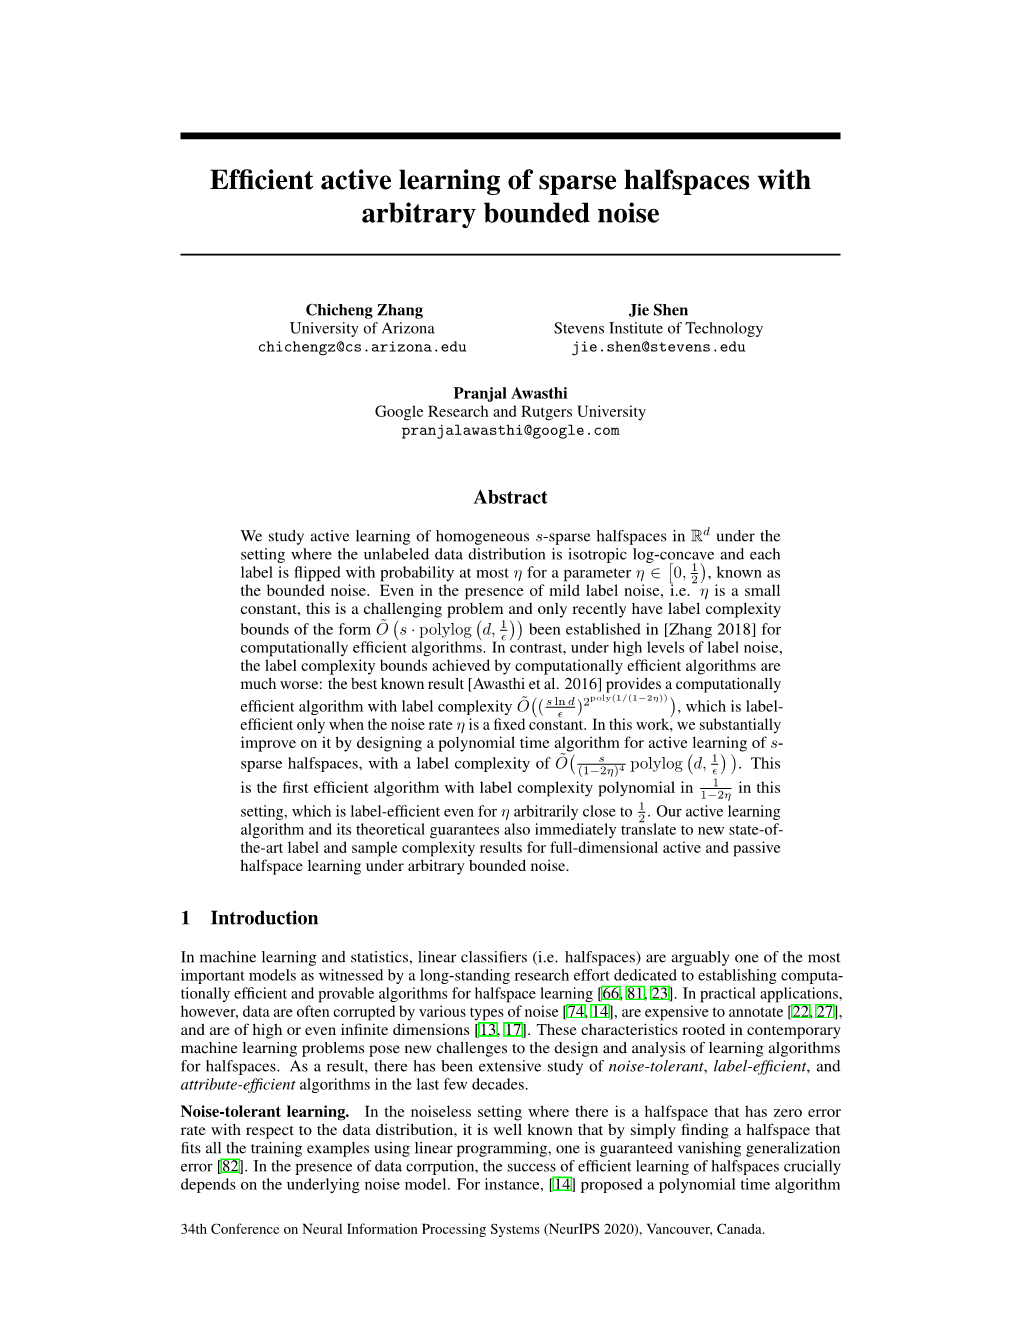 Efficient Active Learning of Sparse Halfspaces with Arbitrary Bounded